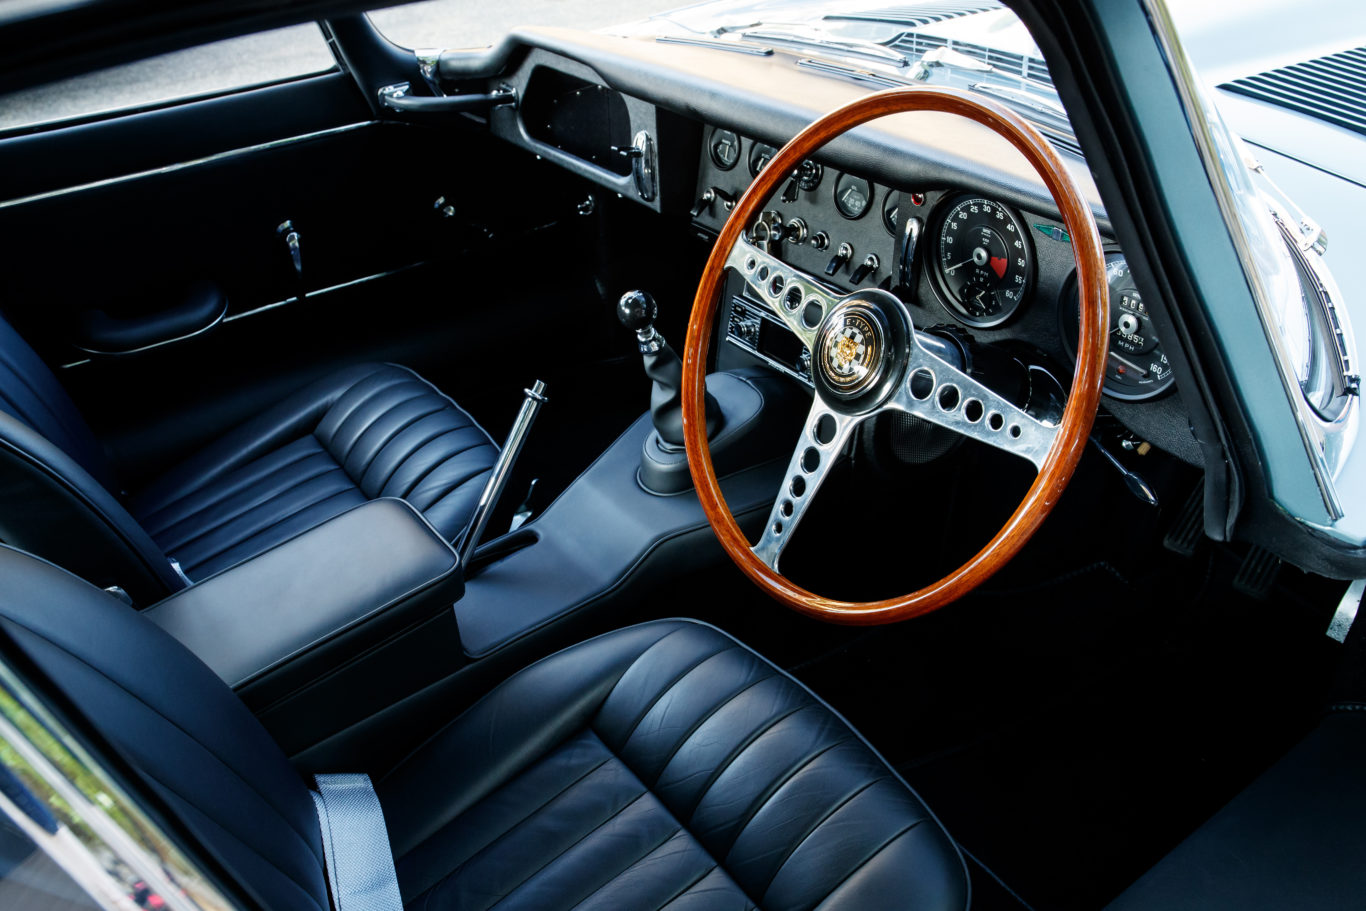 The E-Type's interior is beautifully finished 